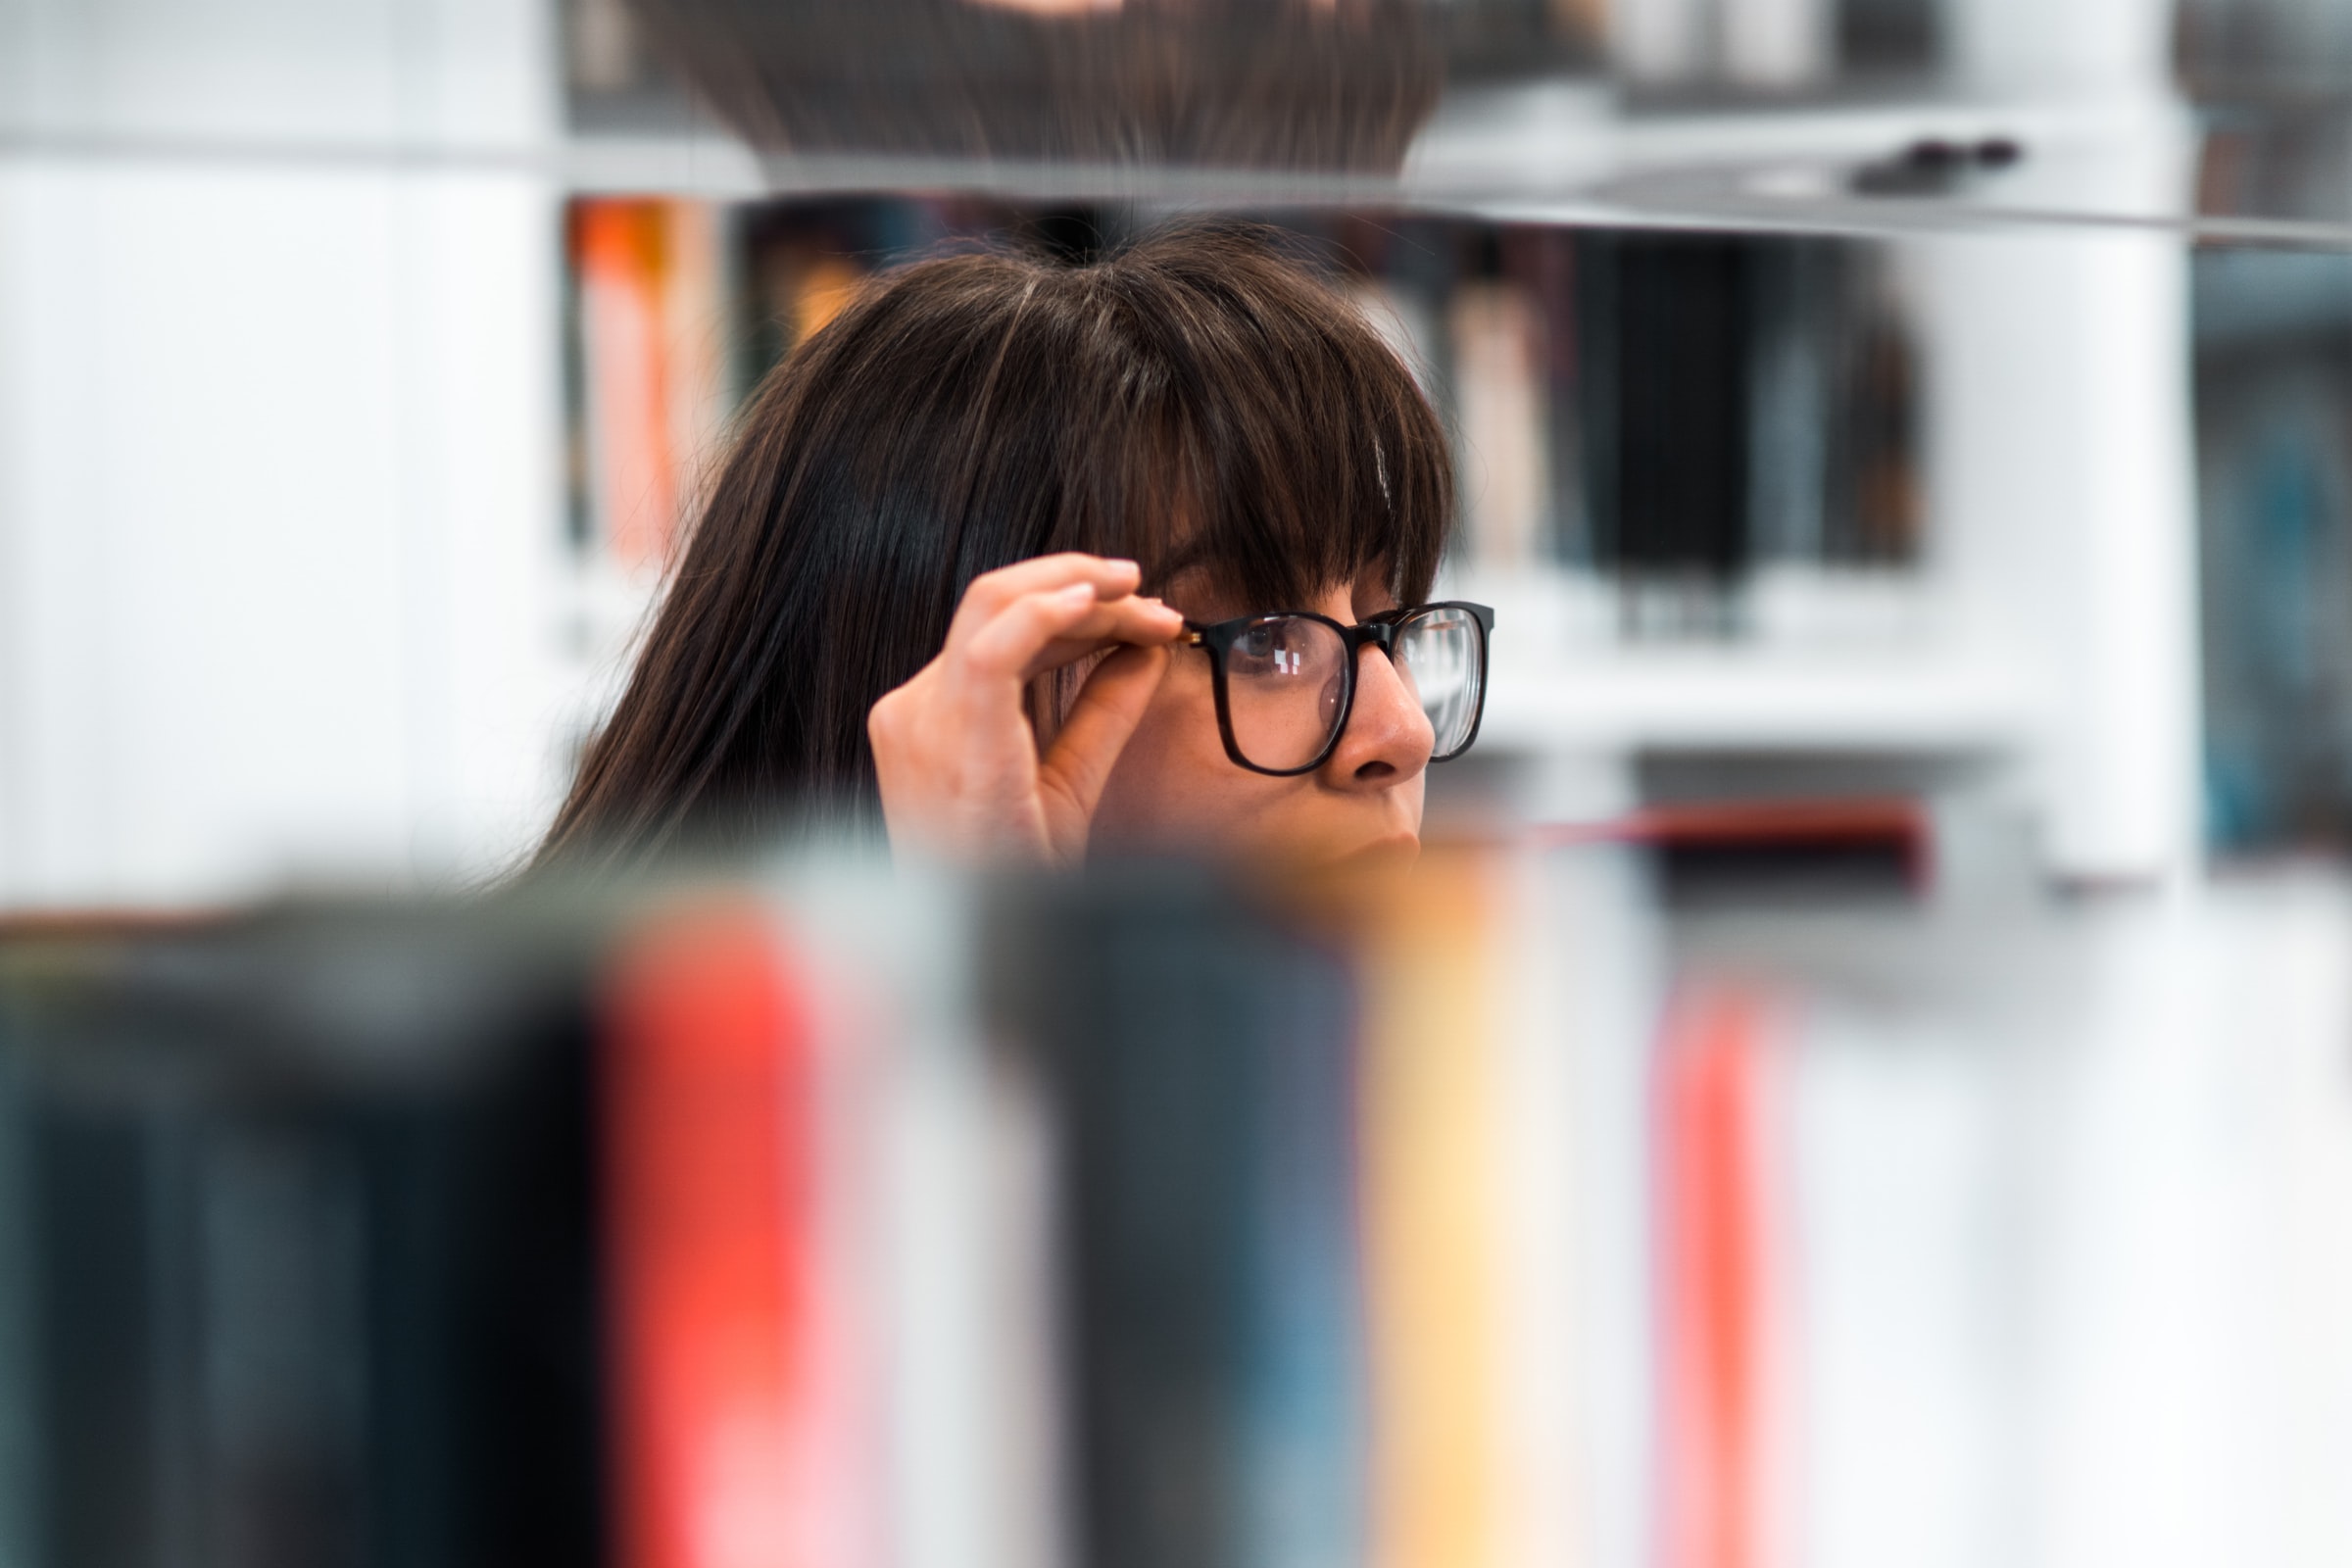 Decorative, person wearing glasses looking at books